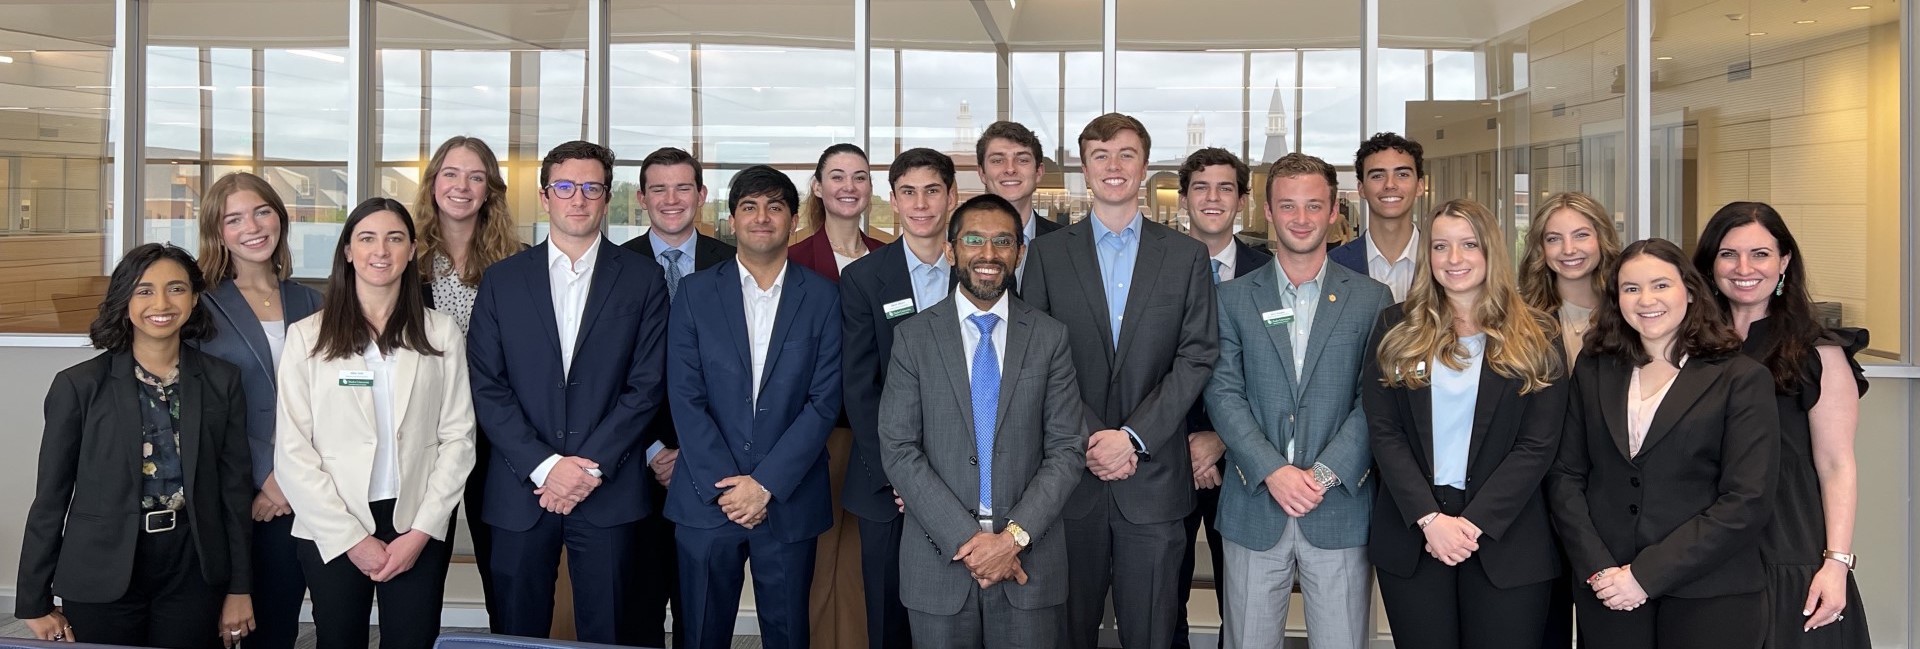 Group photo of several professionally-dressed students within the Hankamer Student Organization with Dean Sandeep Mazumder in the middle